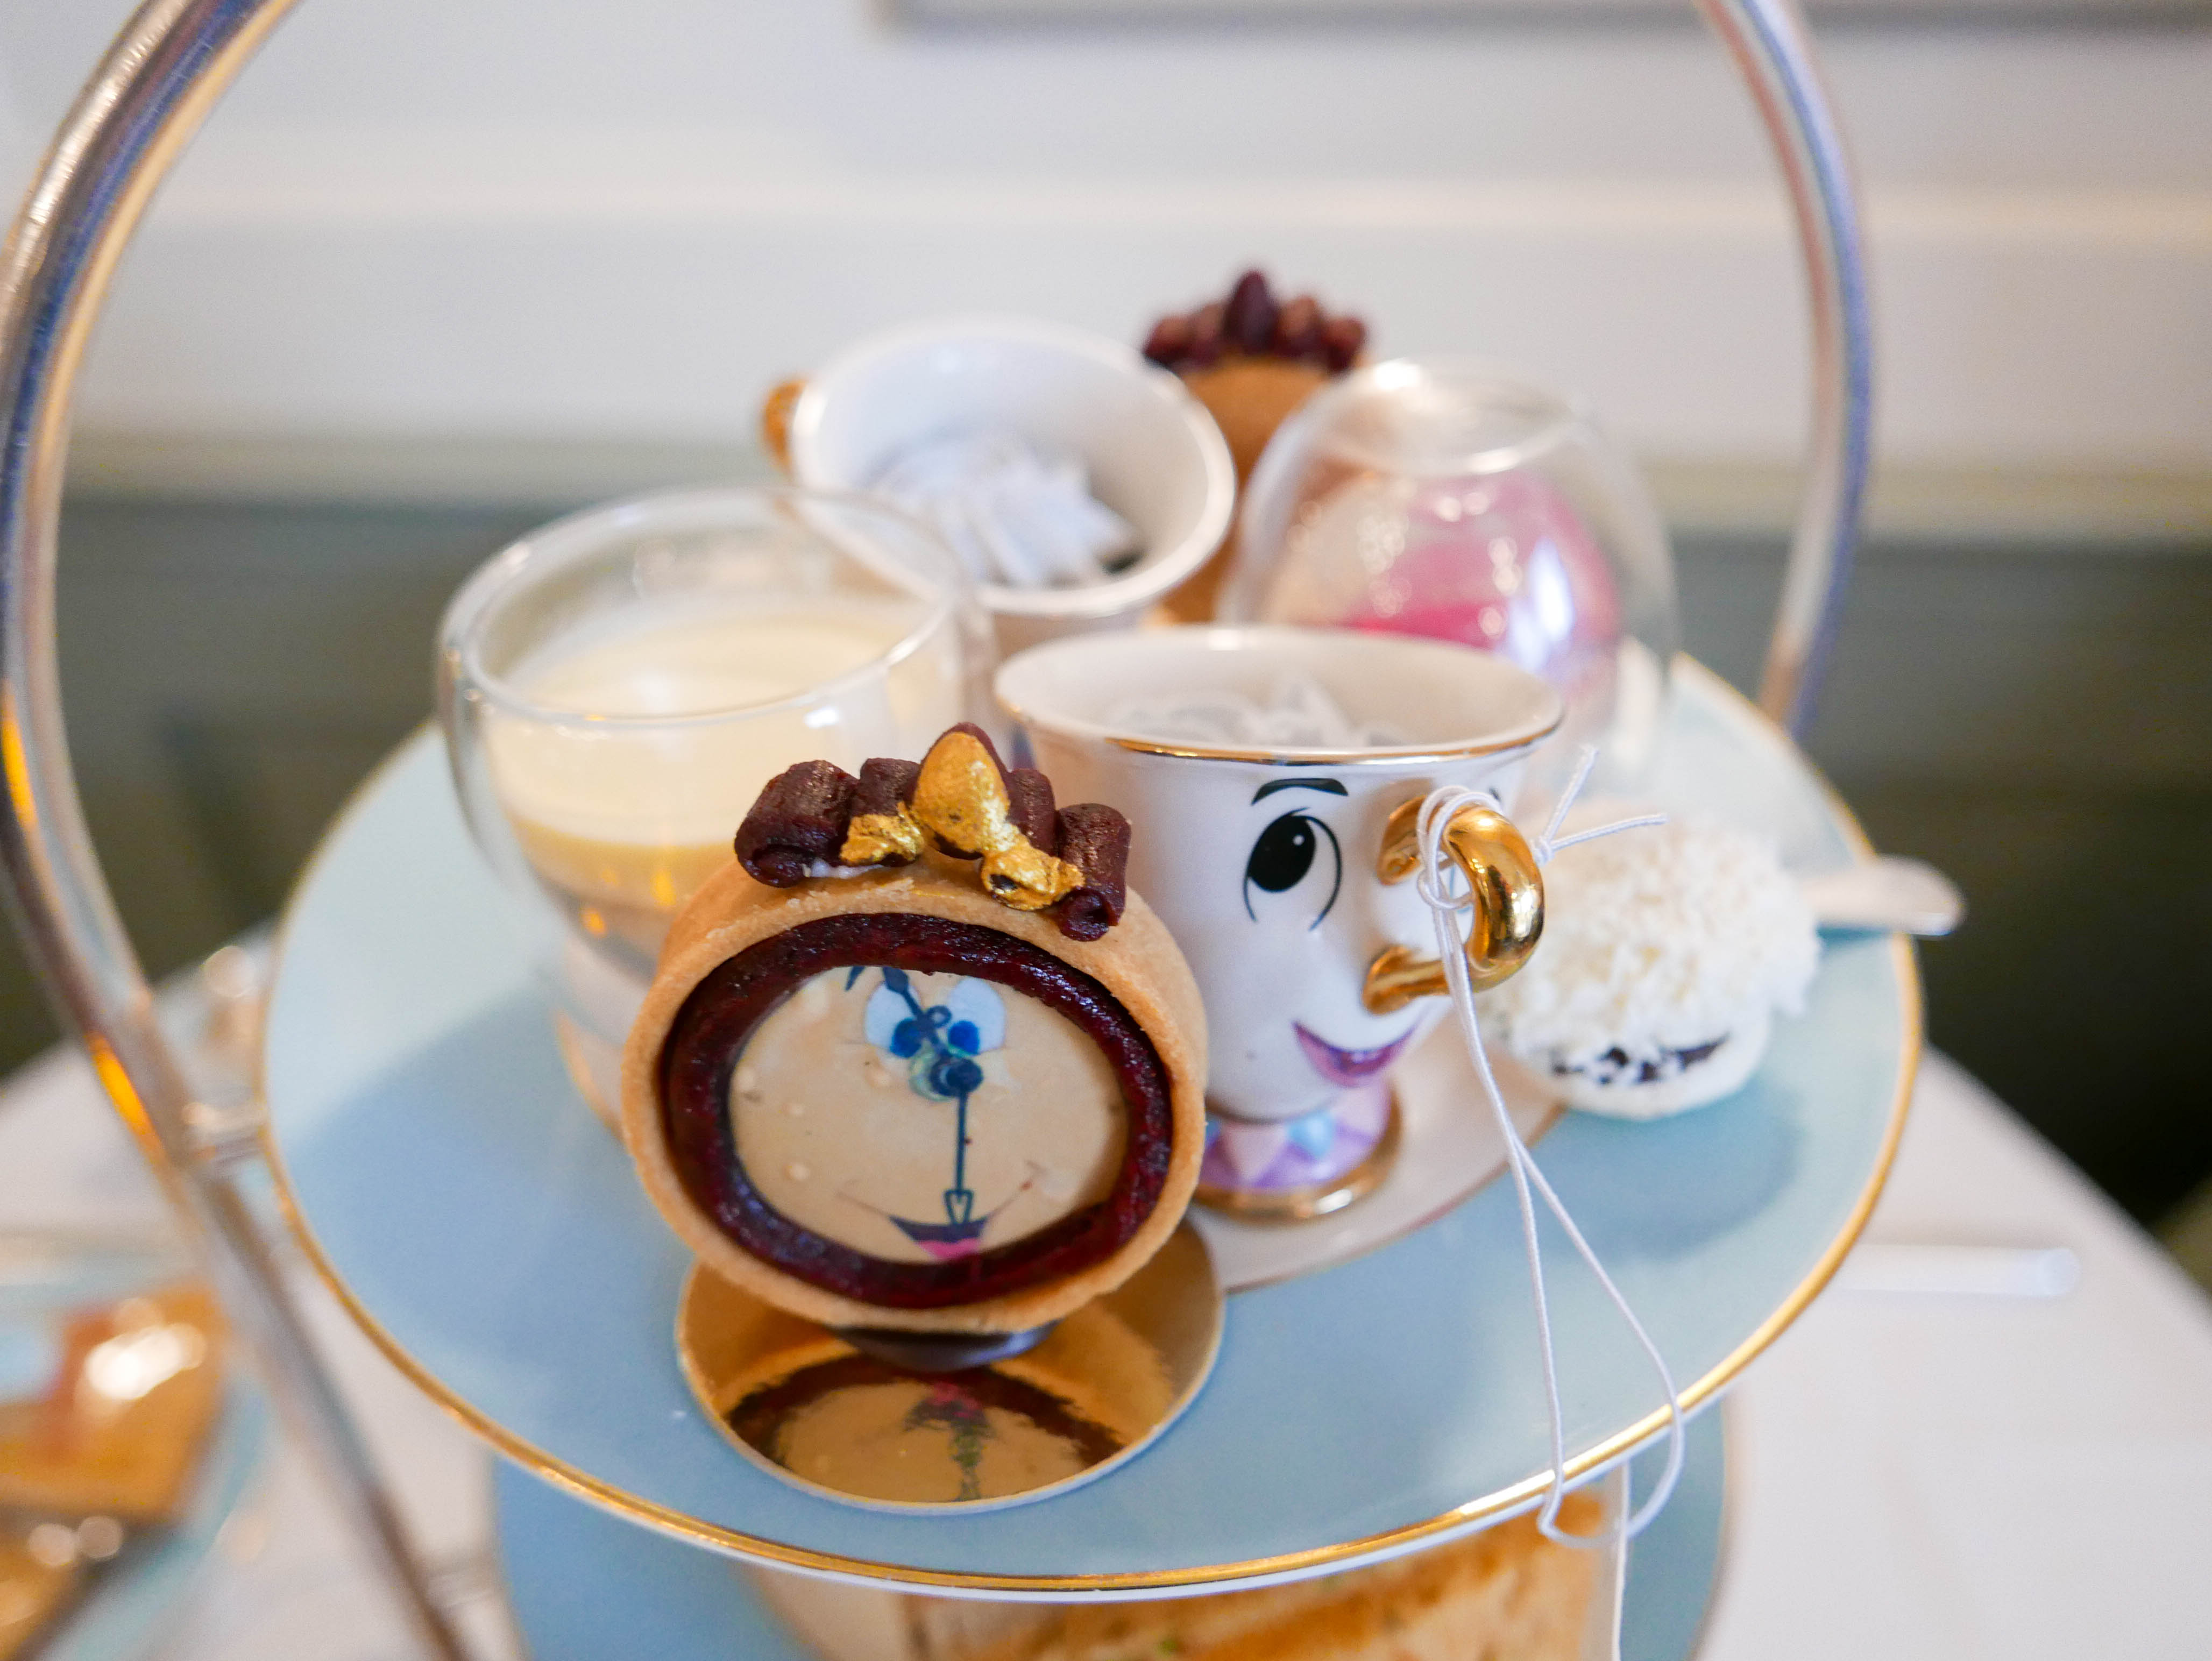 The Tale as old as Time! Beauty and the Beast Afternoon Tea at The Kensington